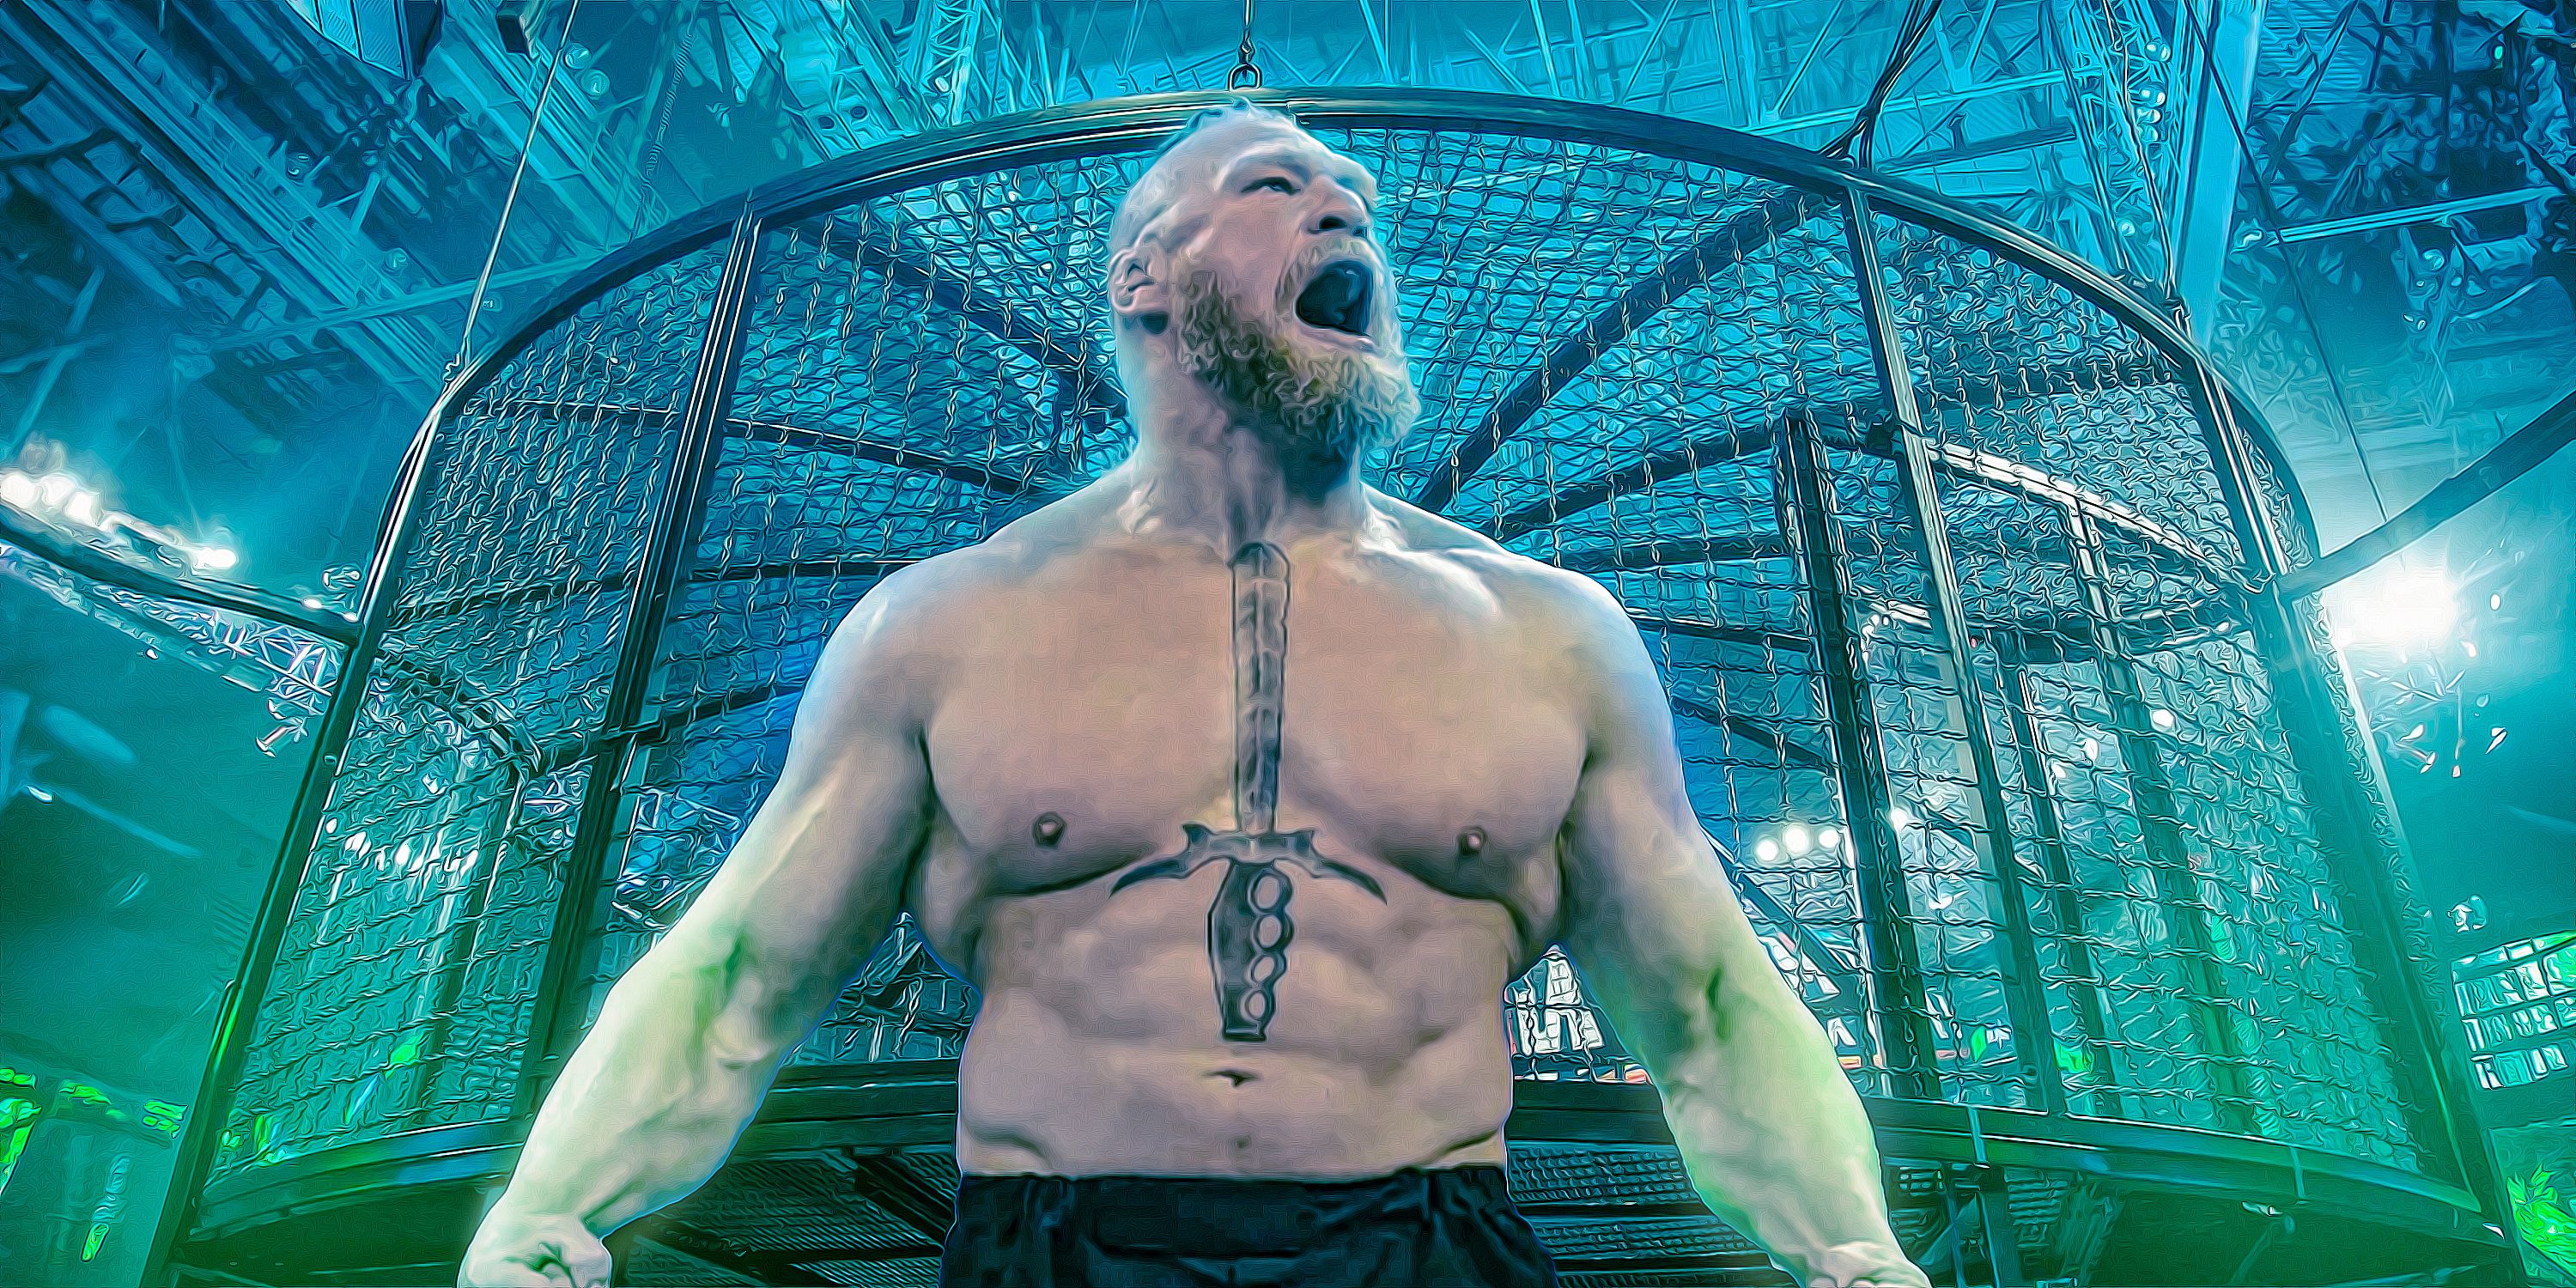 Brock-Lesnars-scrapped-Elimination-Chamber-plans-due-to-WWE-lawsuit--image